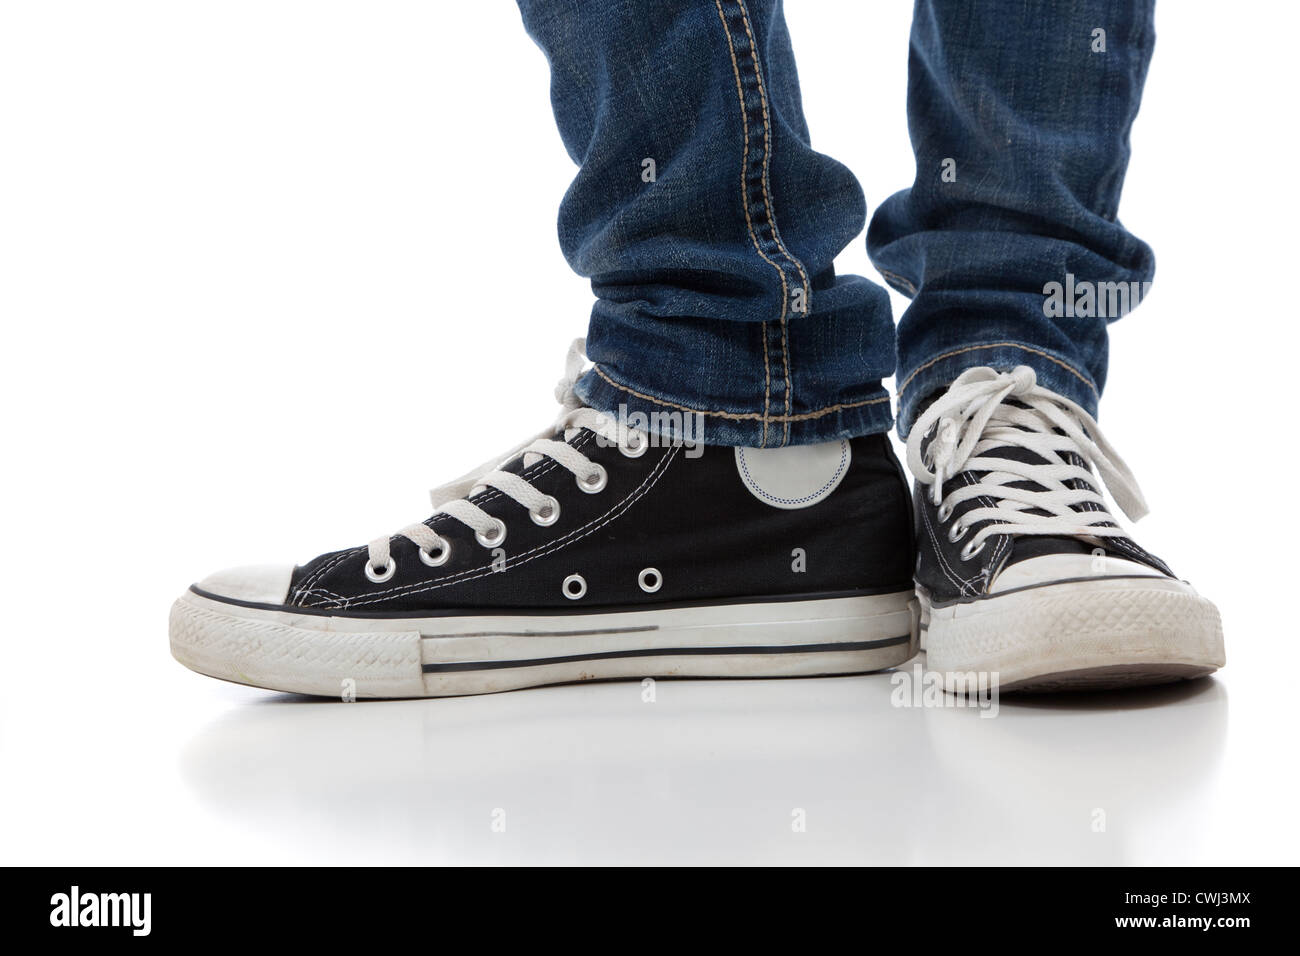 Person in blue denim jeans and black and white converse all star